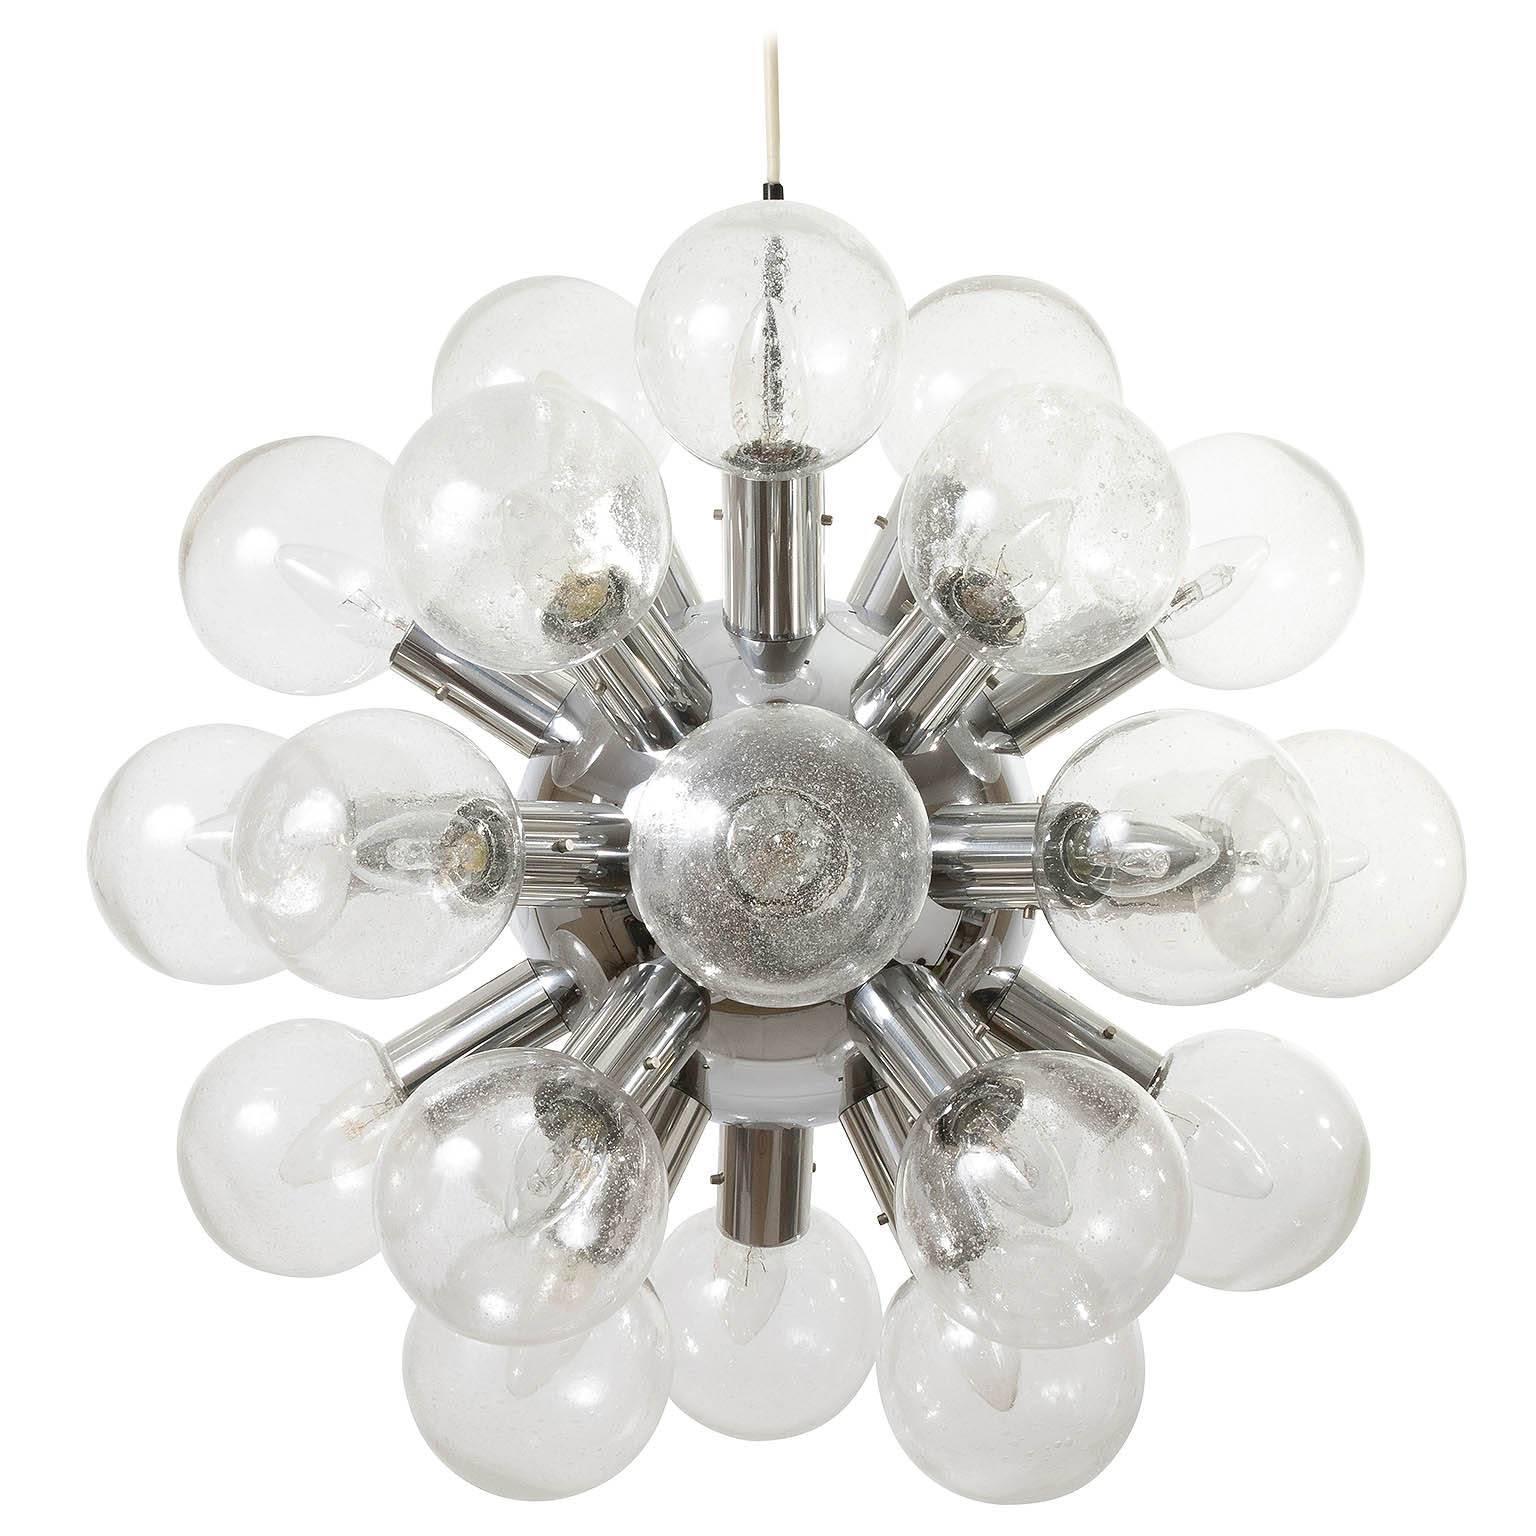 One of four large 27-arm atomic chandeliers or pendant lights model 'RS 27 Kugel HL' by J.T. Kalmar, Austria, manufactured in midcentury, circa 1970 (late 1960s or early 1970s). 
They are made of polished aluminum and 27 hand blown bubble glass lamp